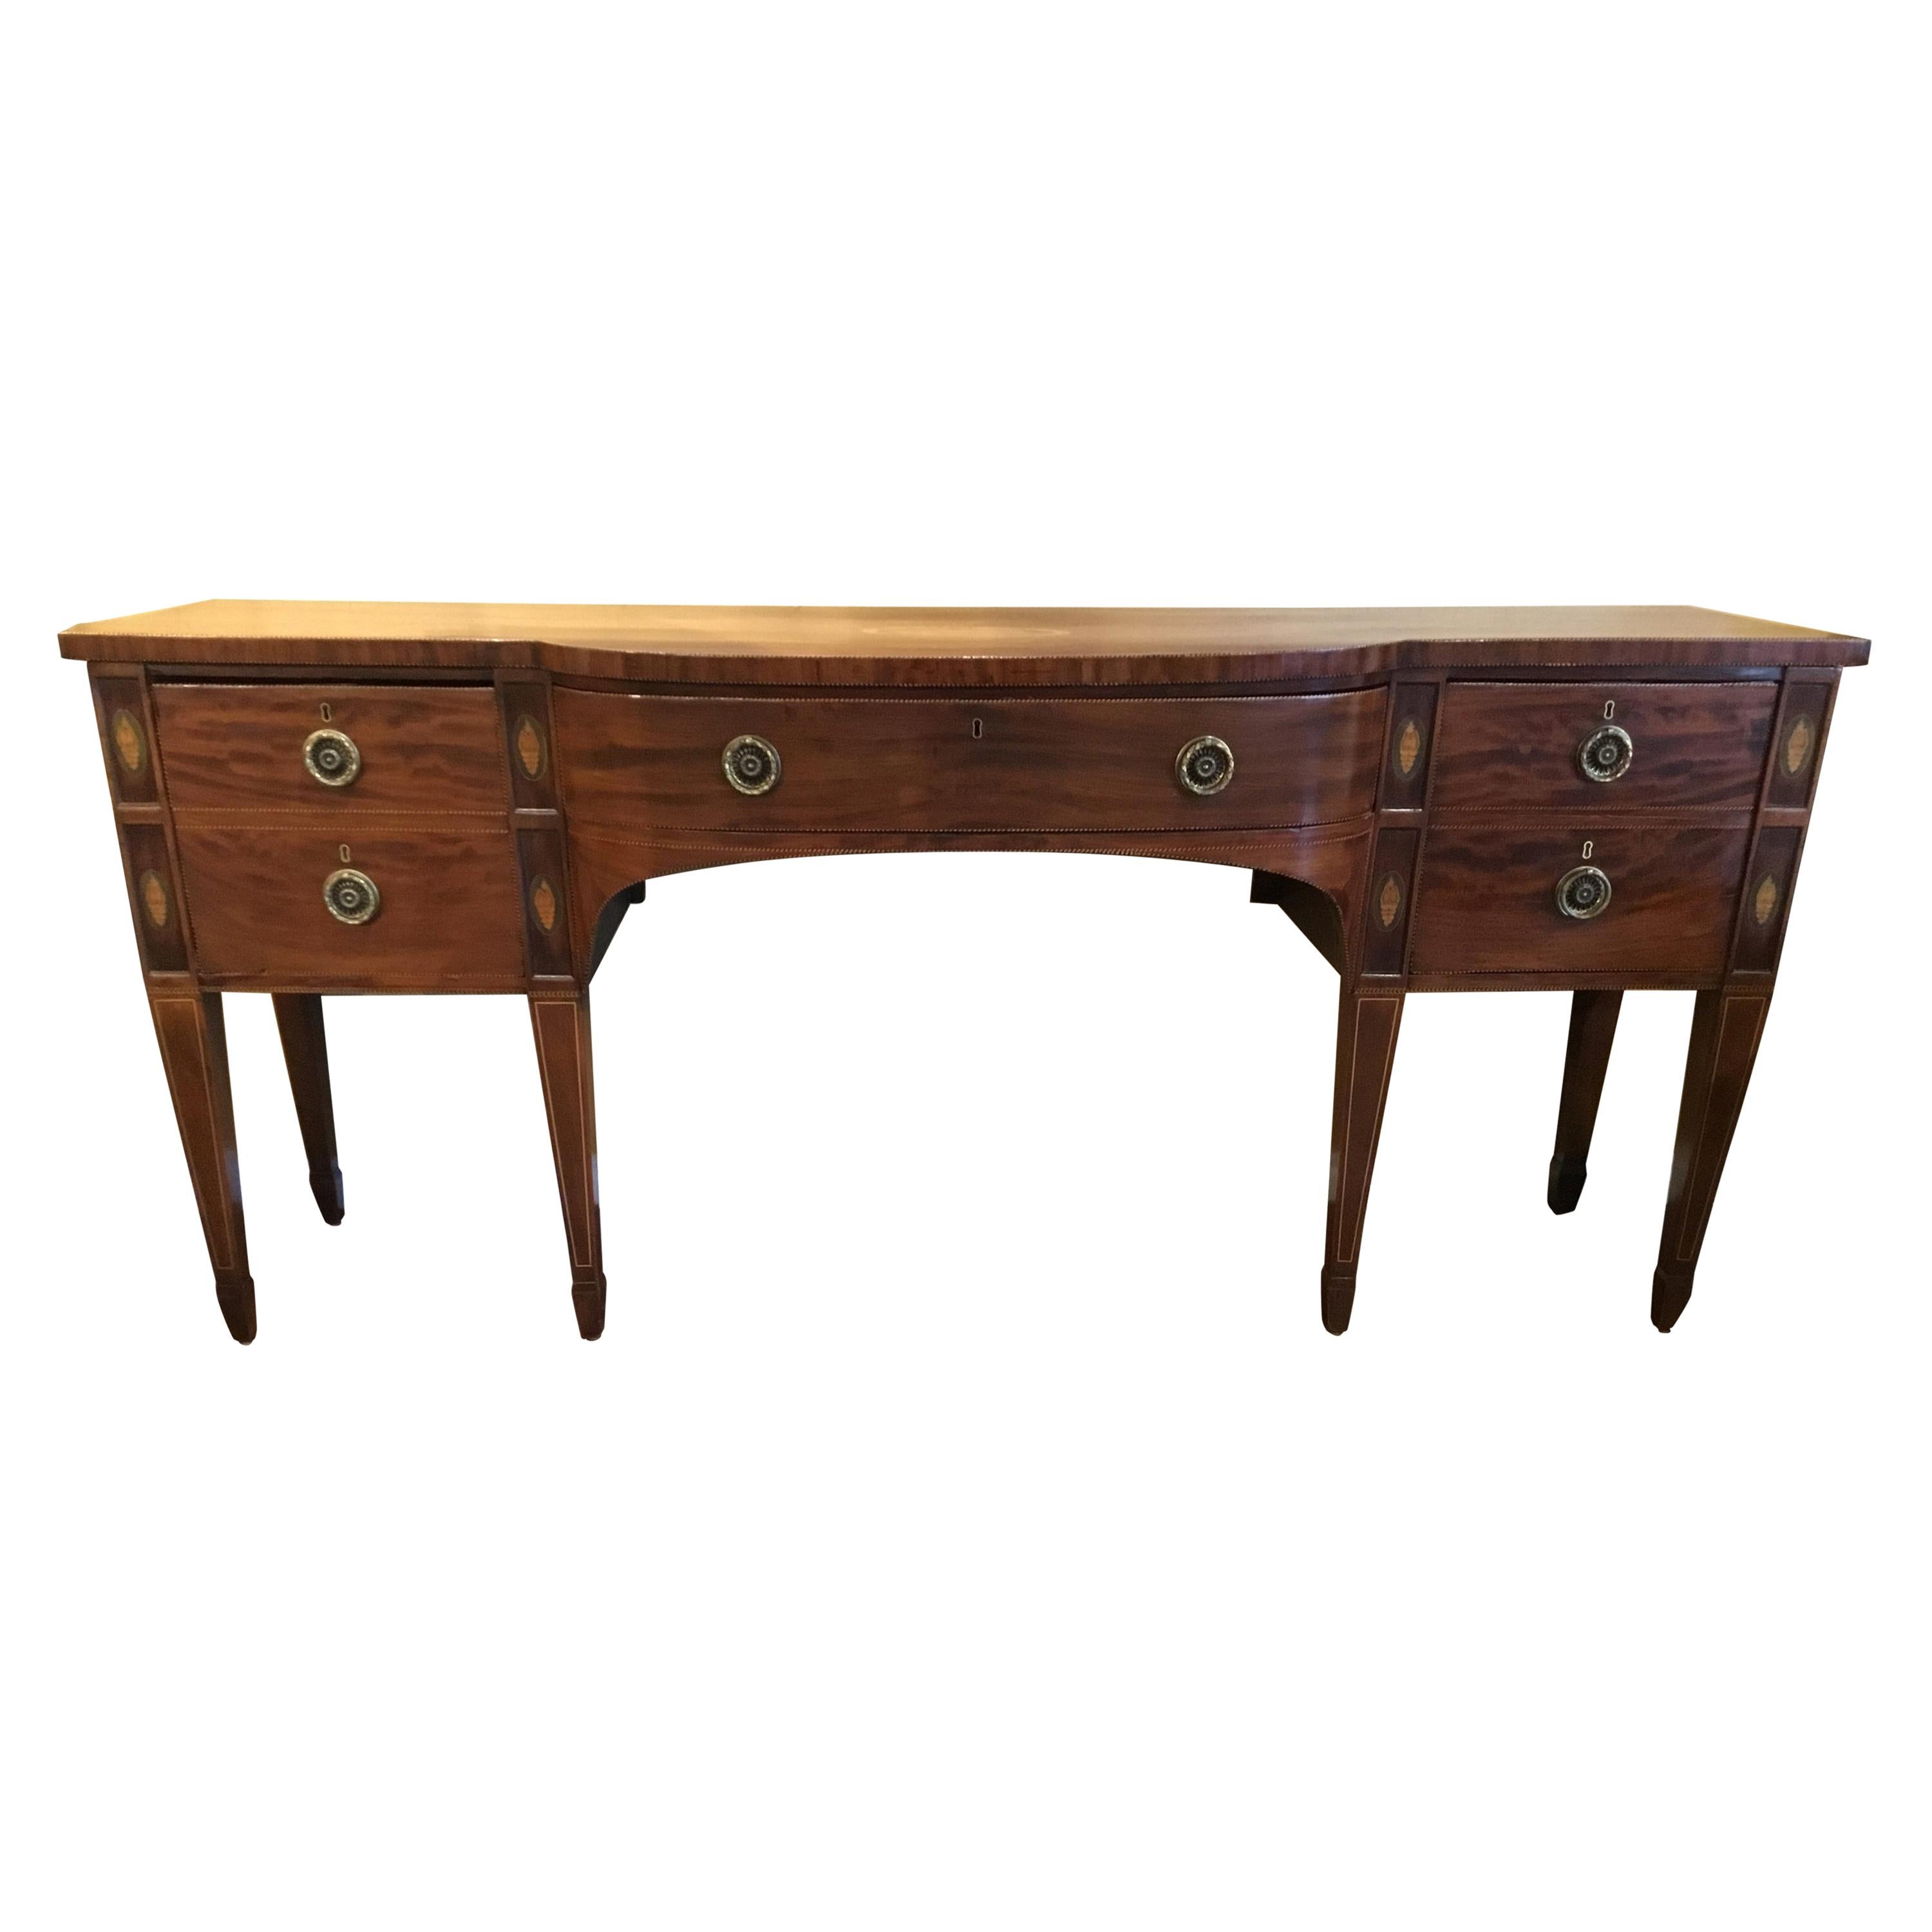 Mahogany and Satinwood Buffet/Sideboard circa 1840 with Marquetry Inlay Sheraton For Sale